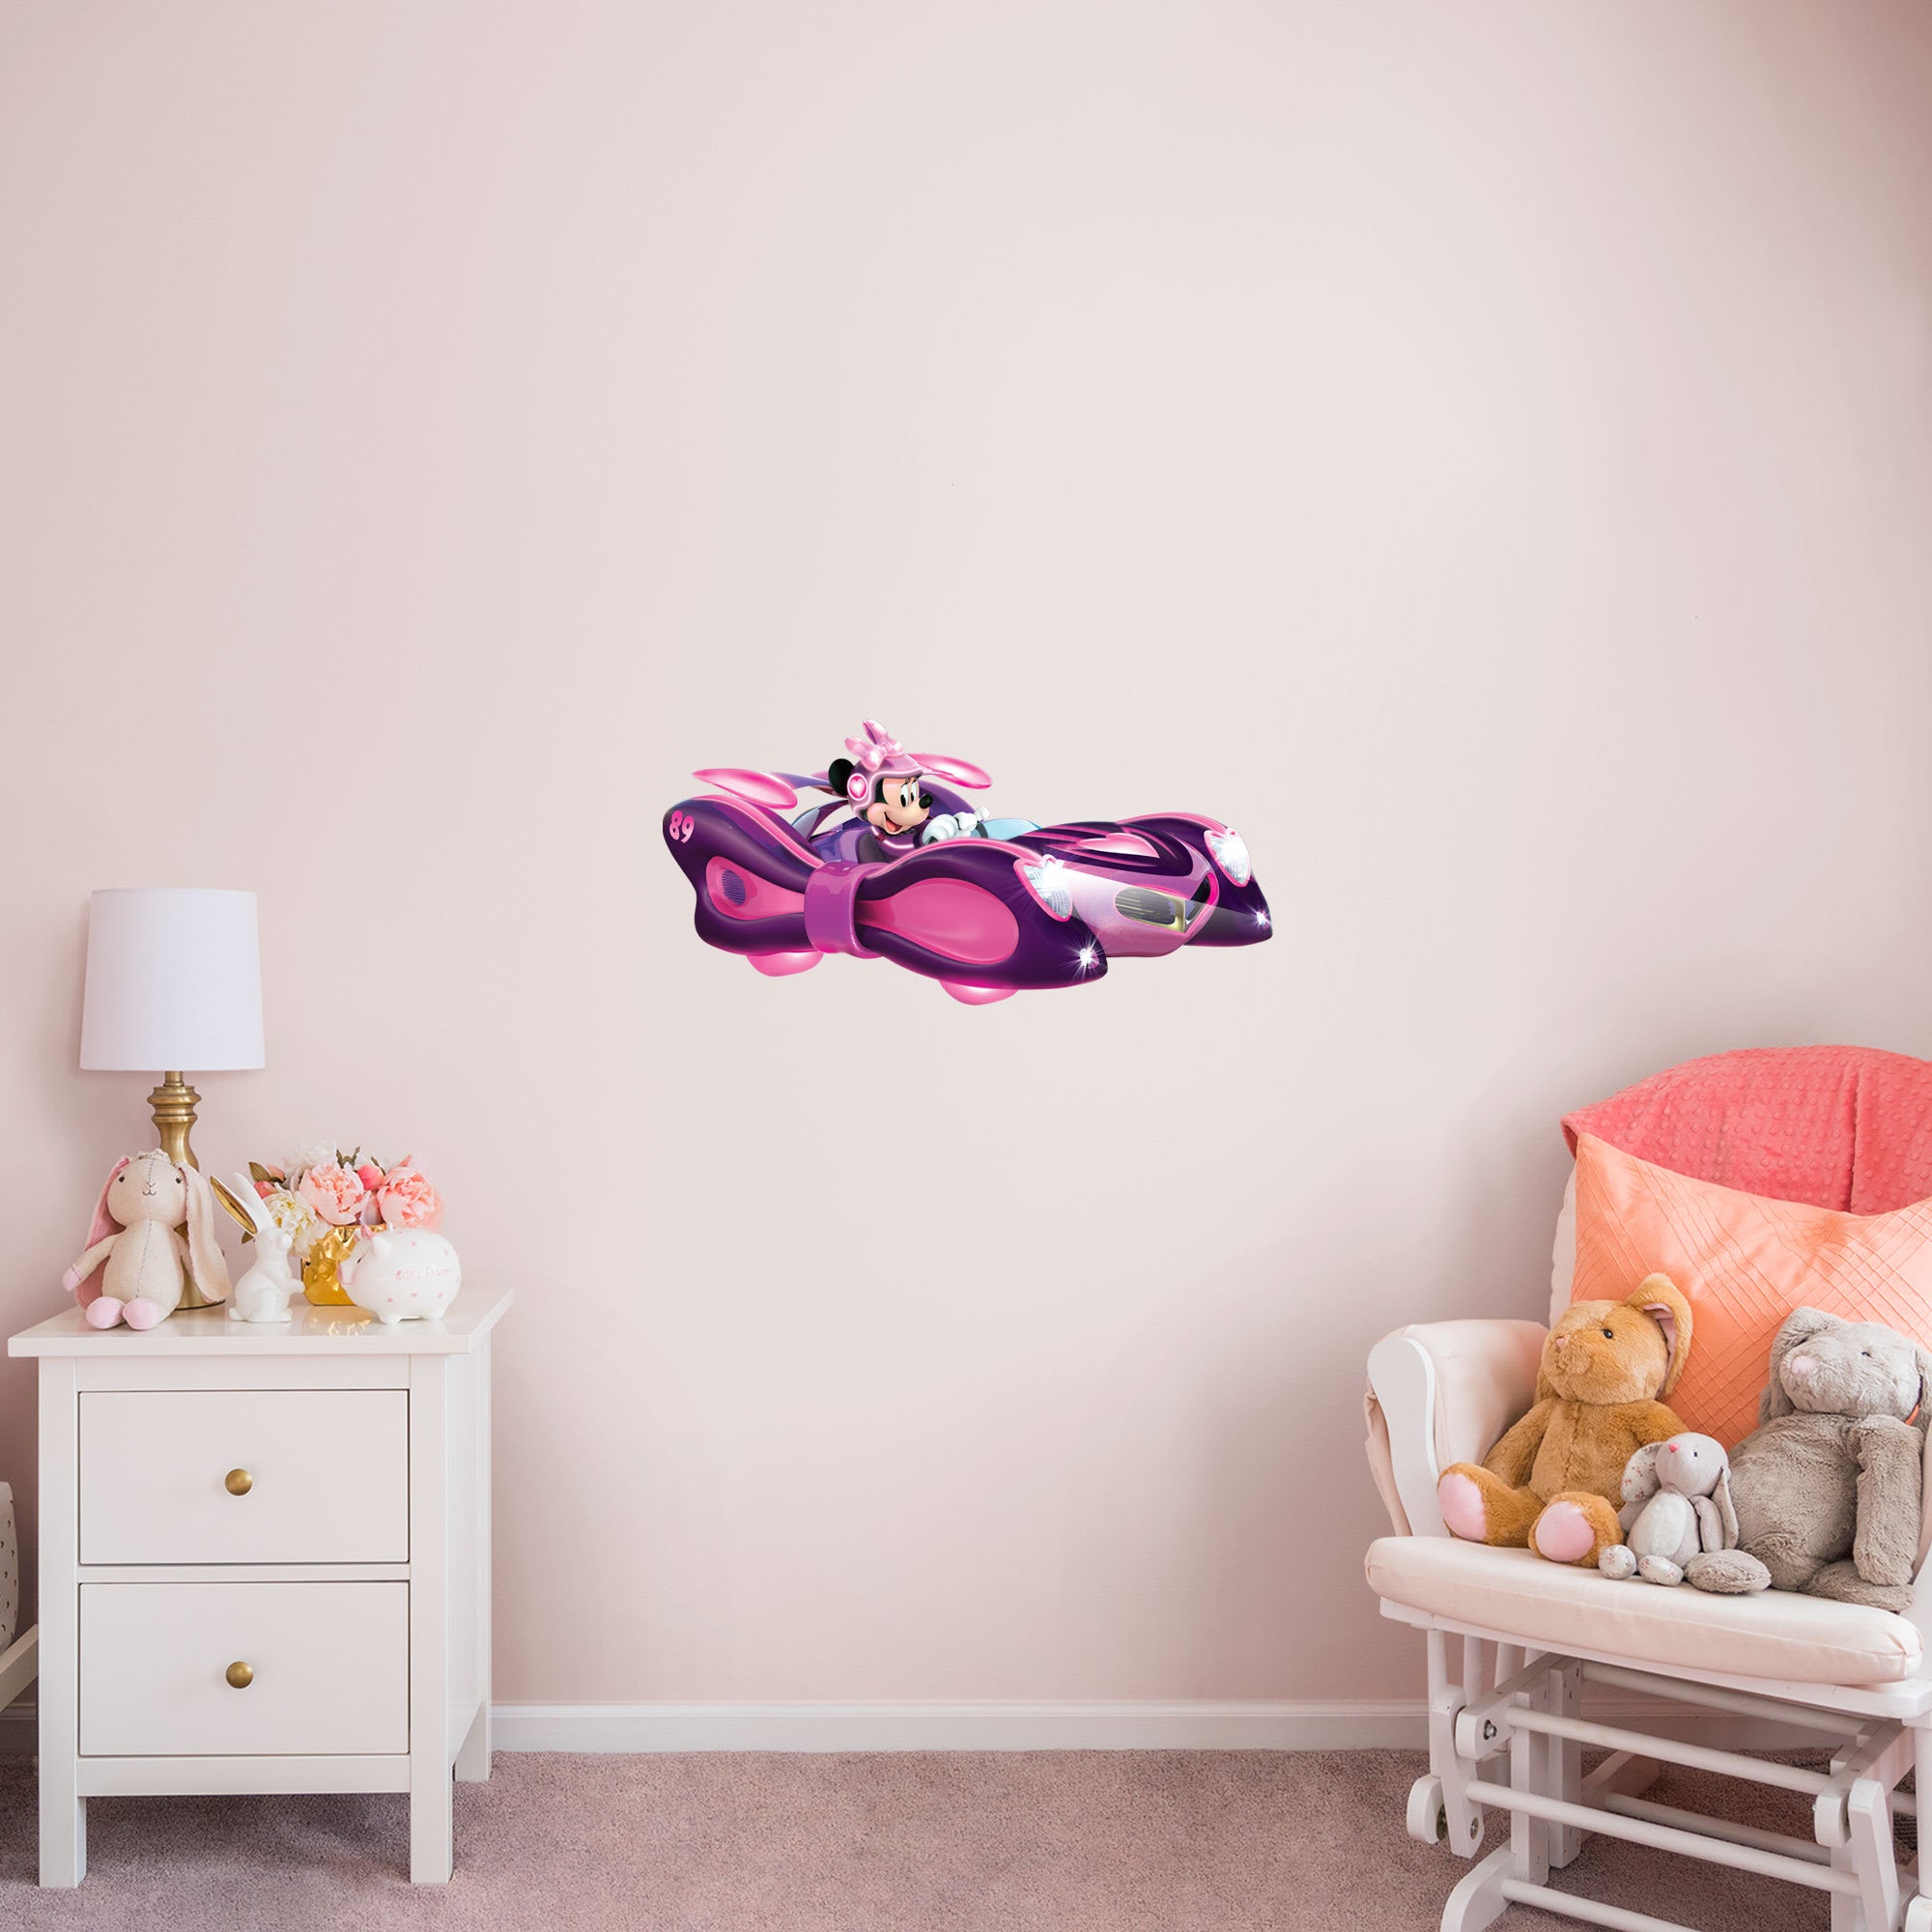 Mickey and the Roadster Racers: Minnie Mouse Racecar - Officially Licensed Disney Removable Wall Decal XL by Fathead | Vinyl